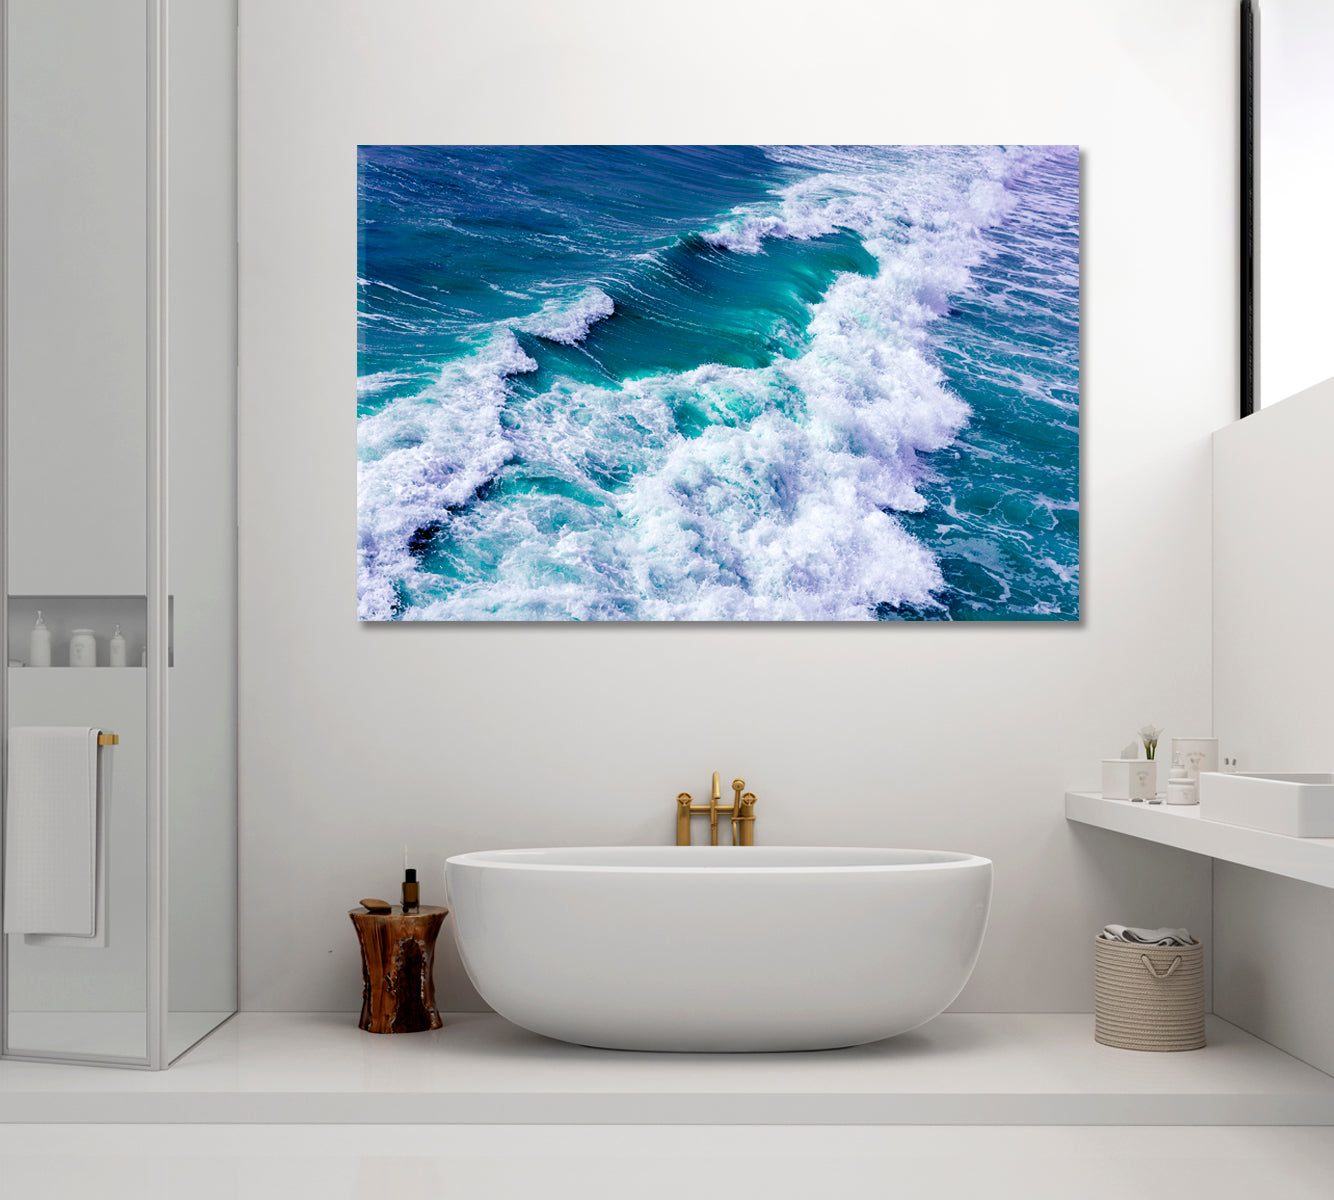 Ocean Waves Canvas Print ArtLexy 1 Panel 24"x16" inches 